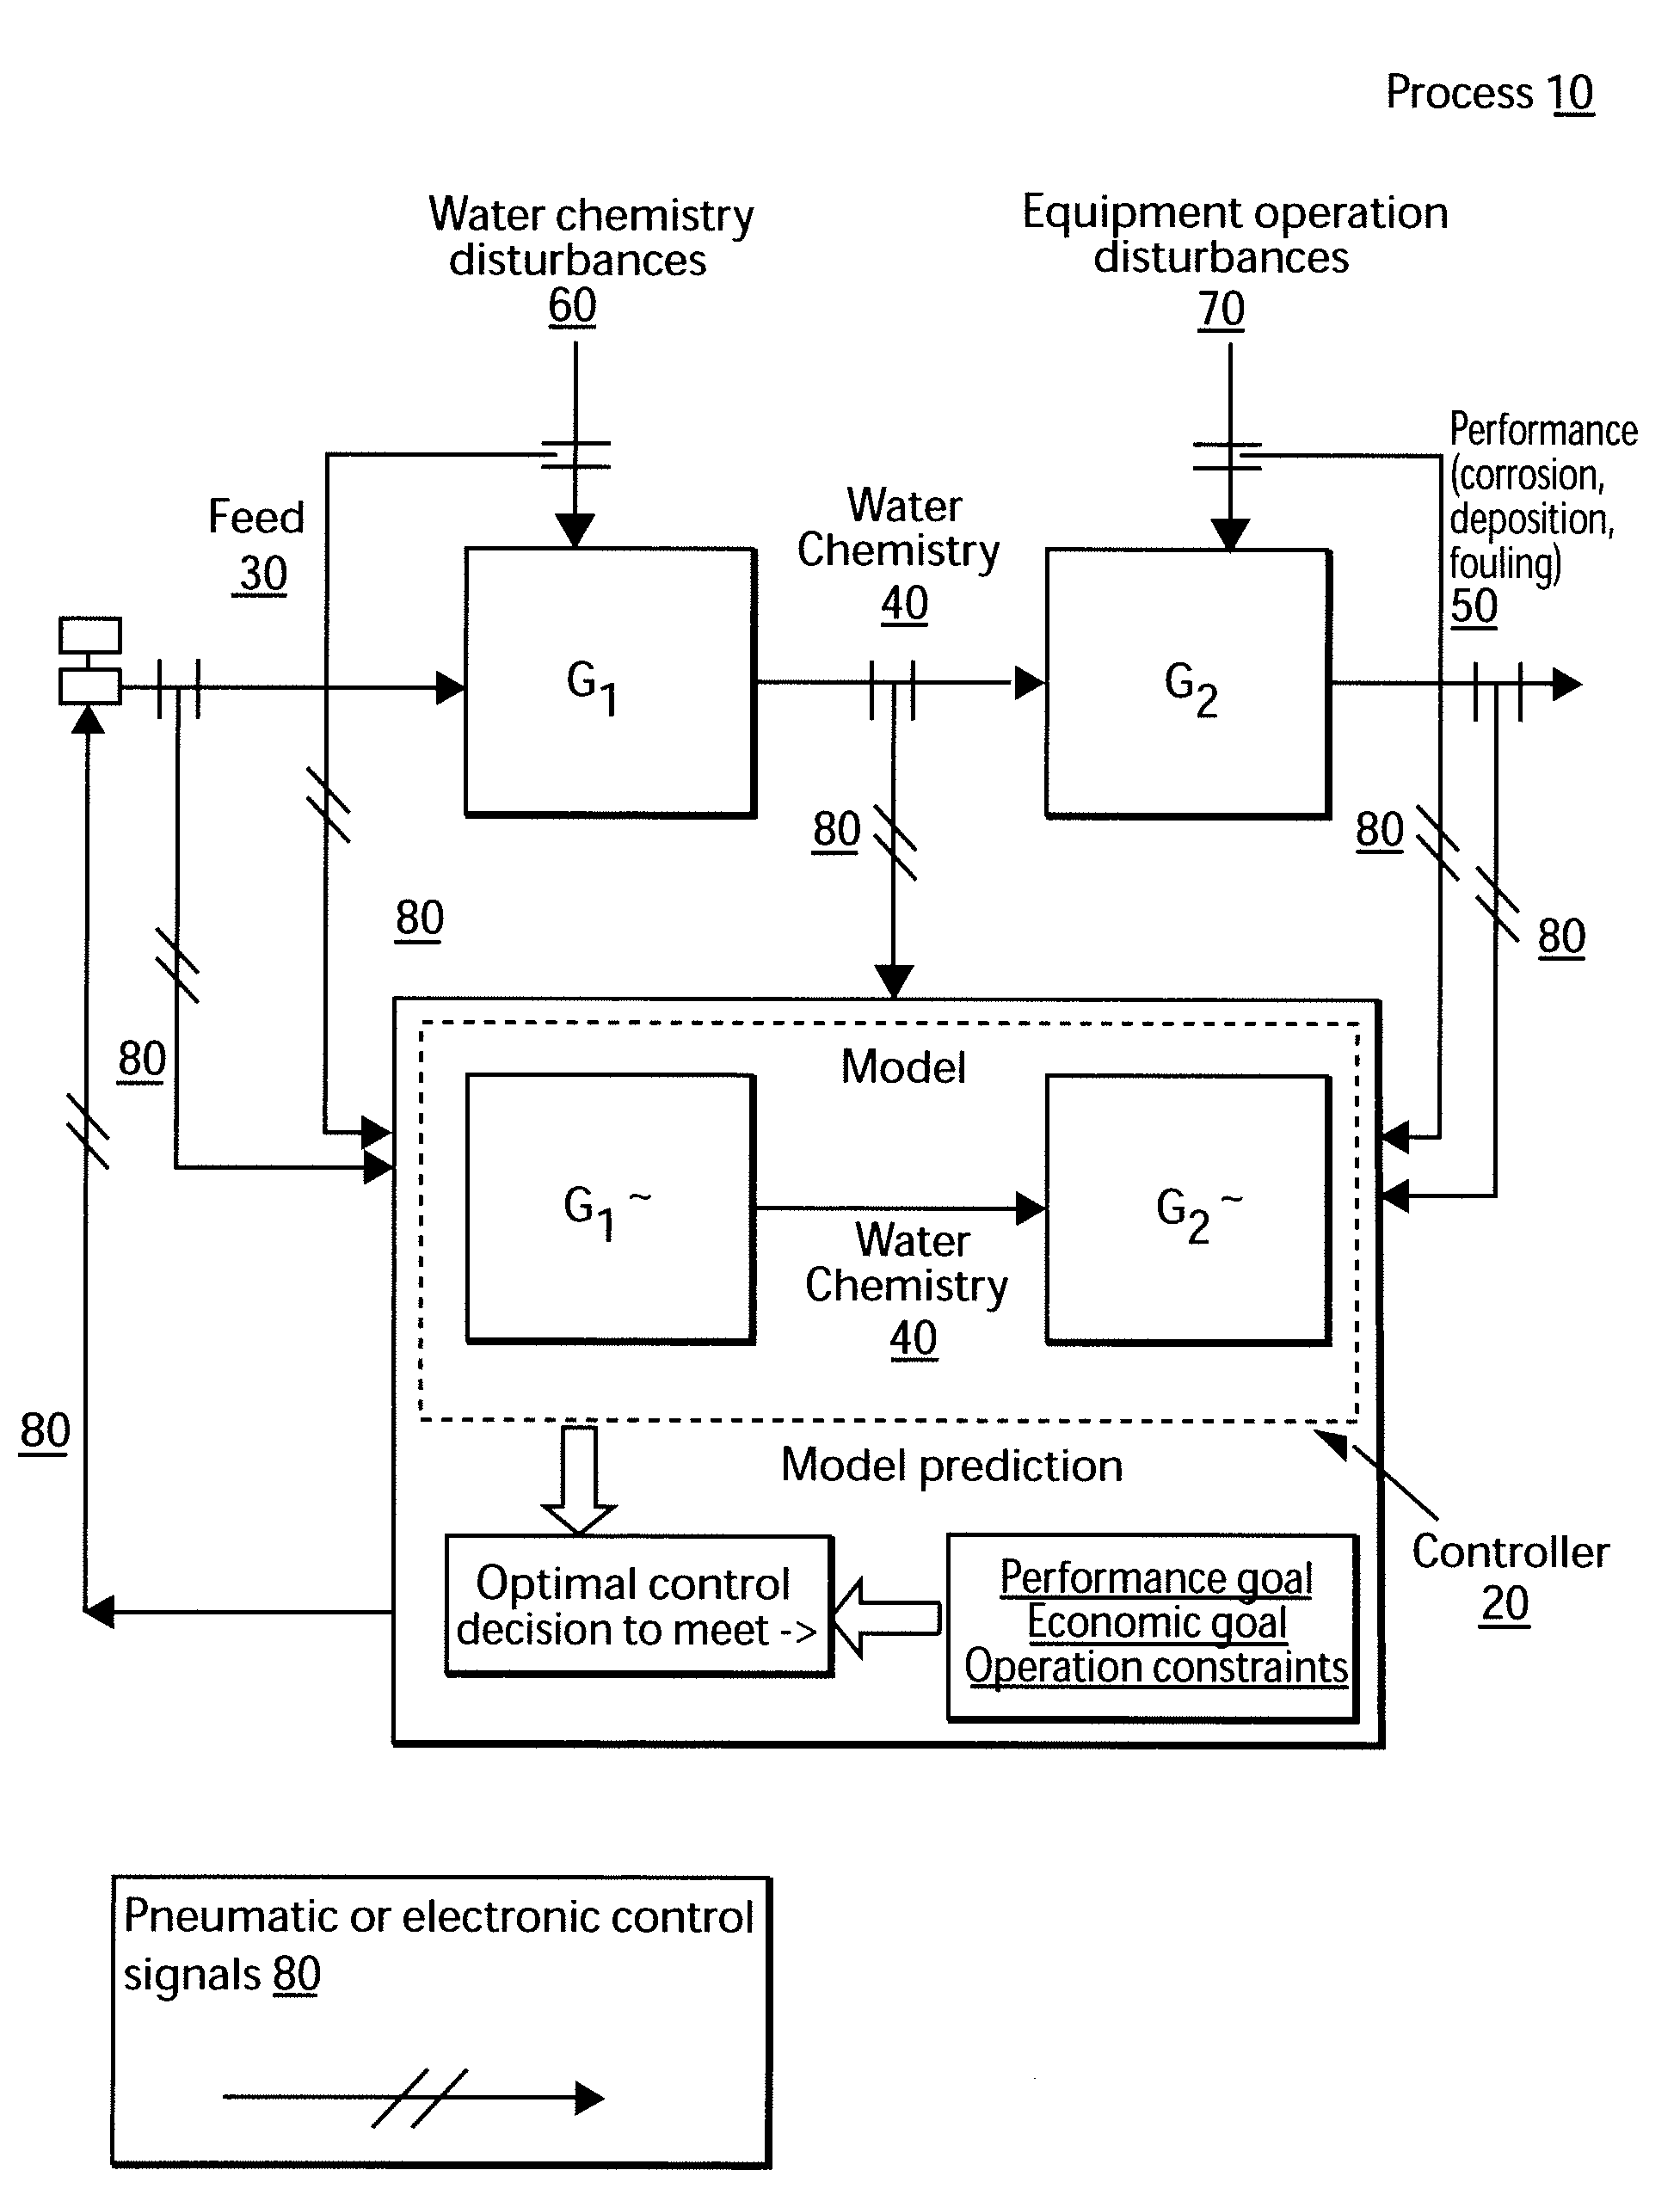 Control system for monitoring localized corrosion in an industrial water system